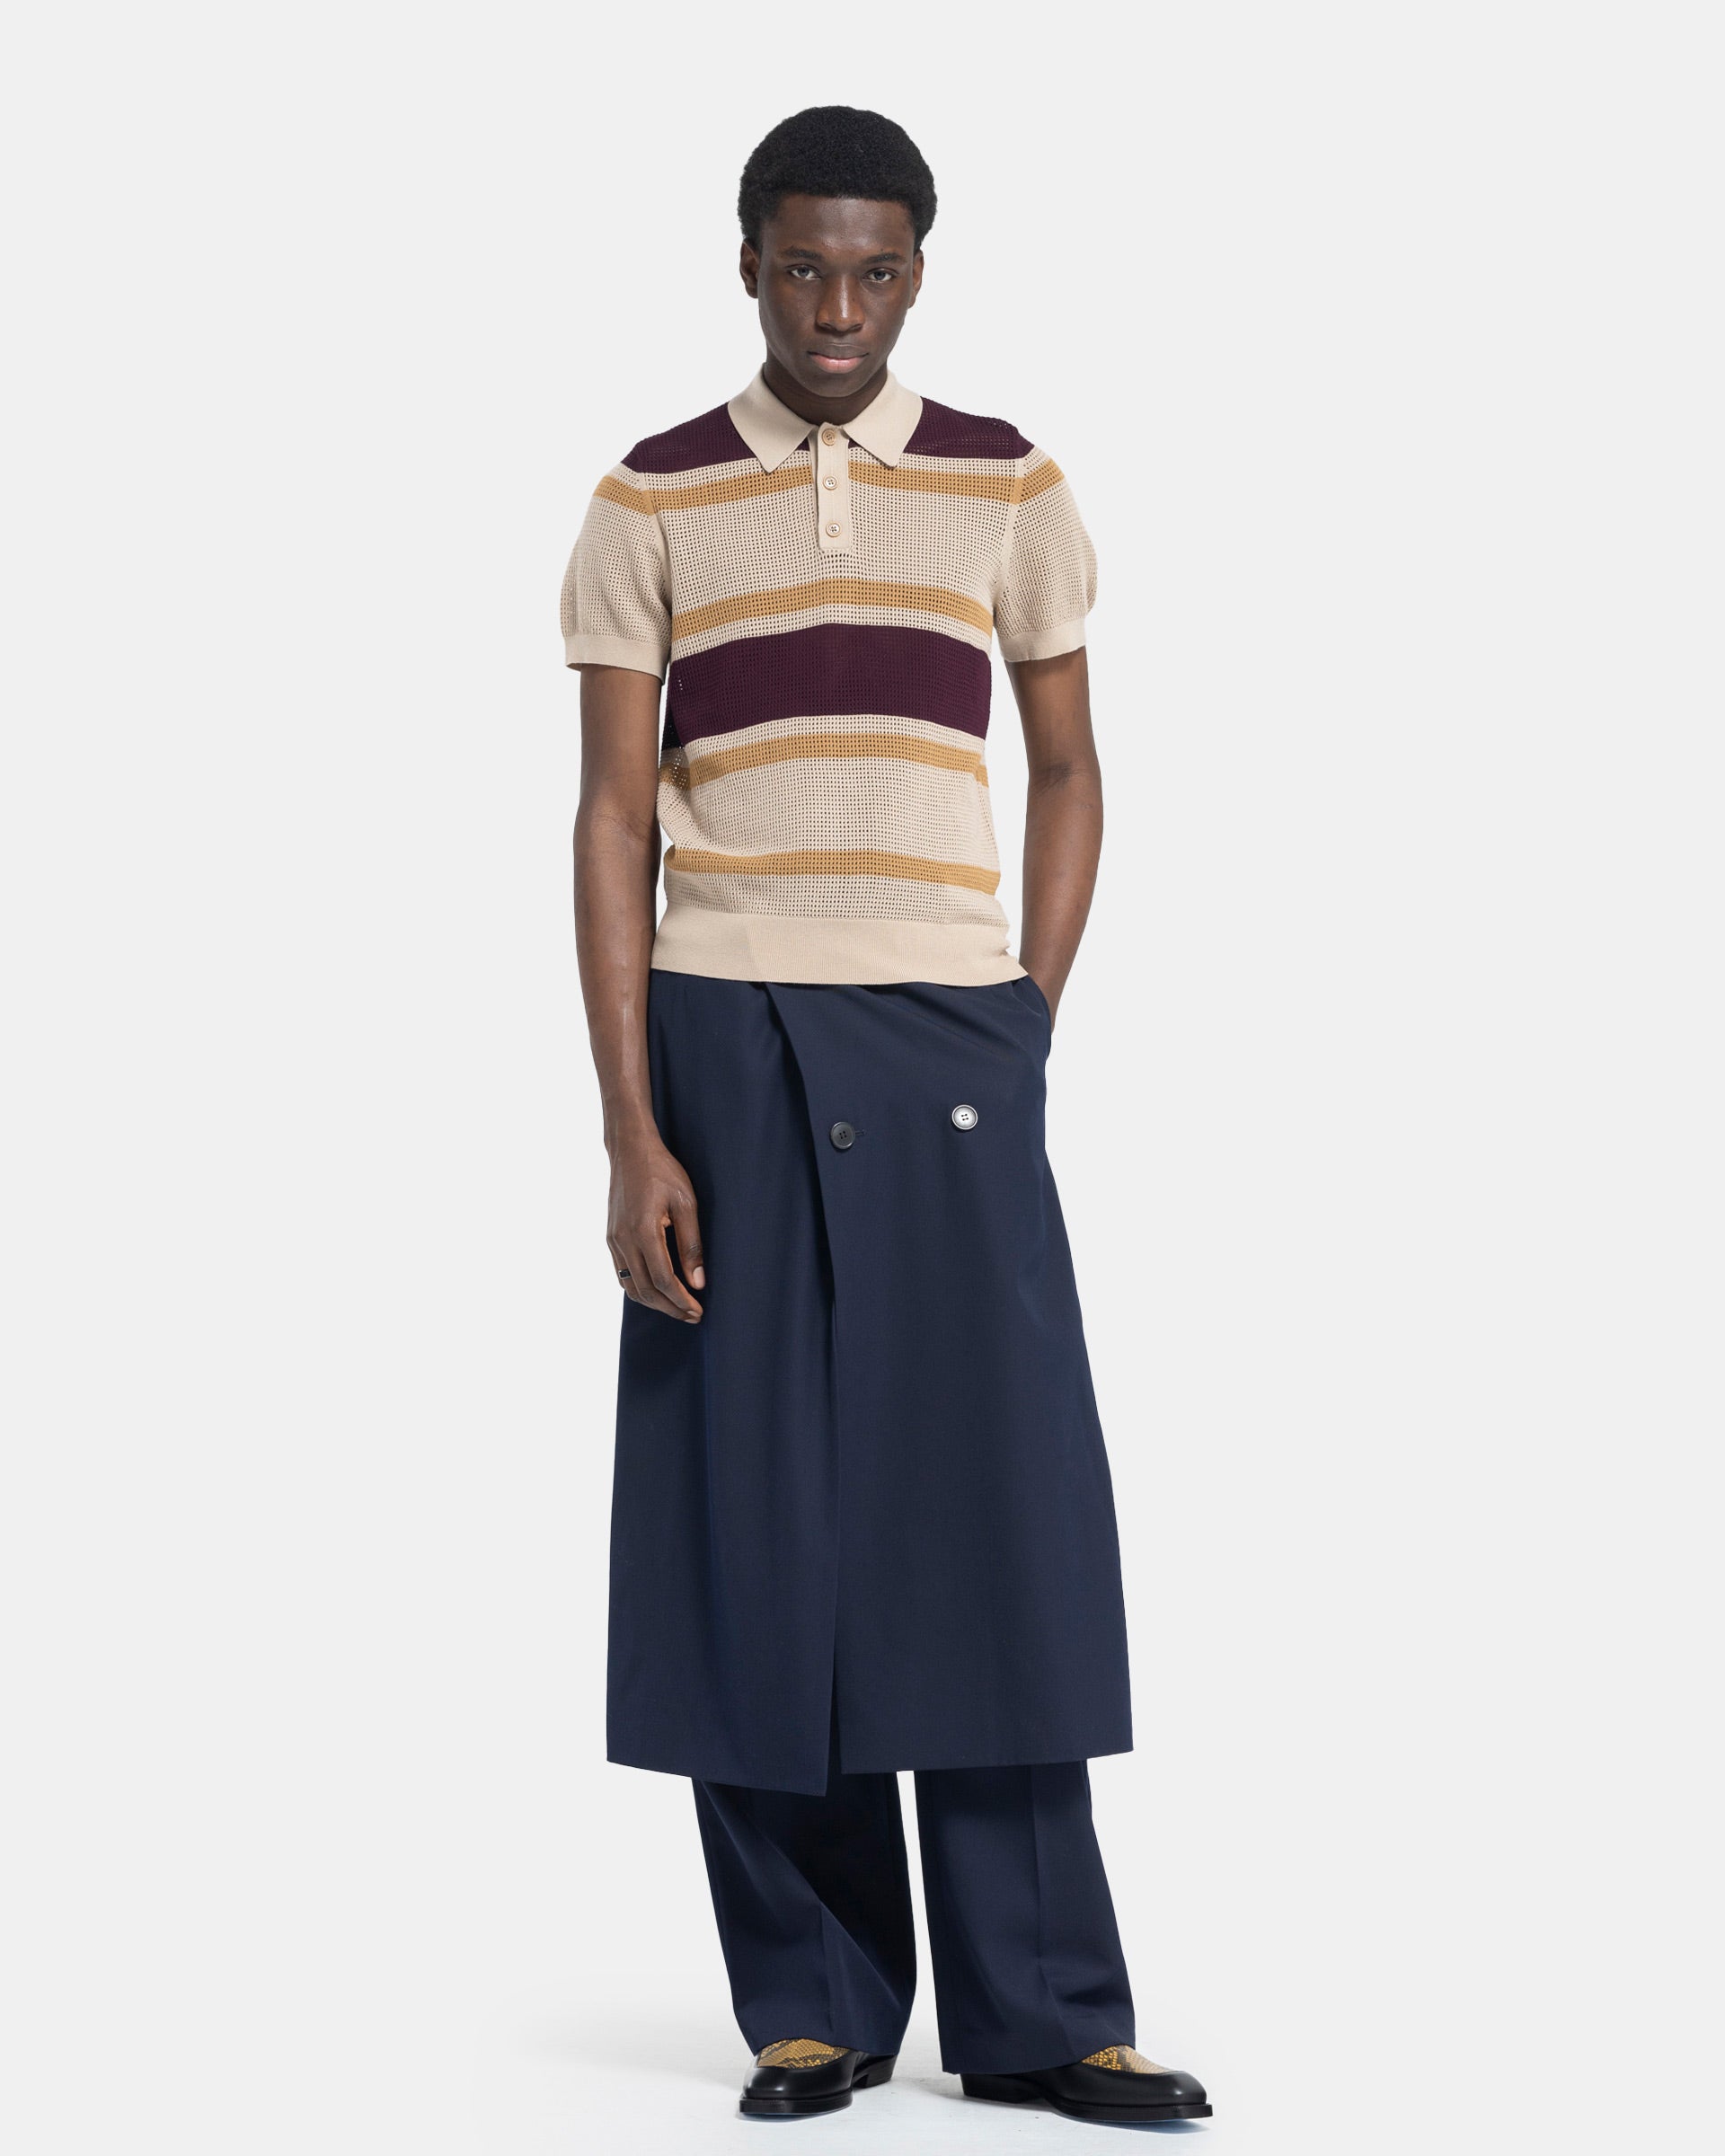 Model wearing Dries Van Noten Priffith Pants in Navy on white background